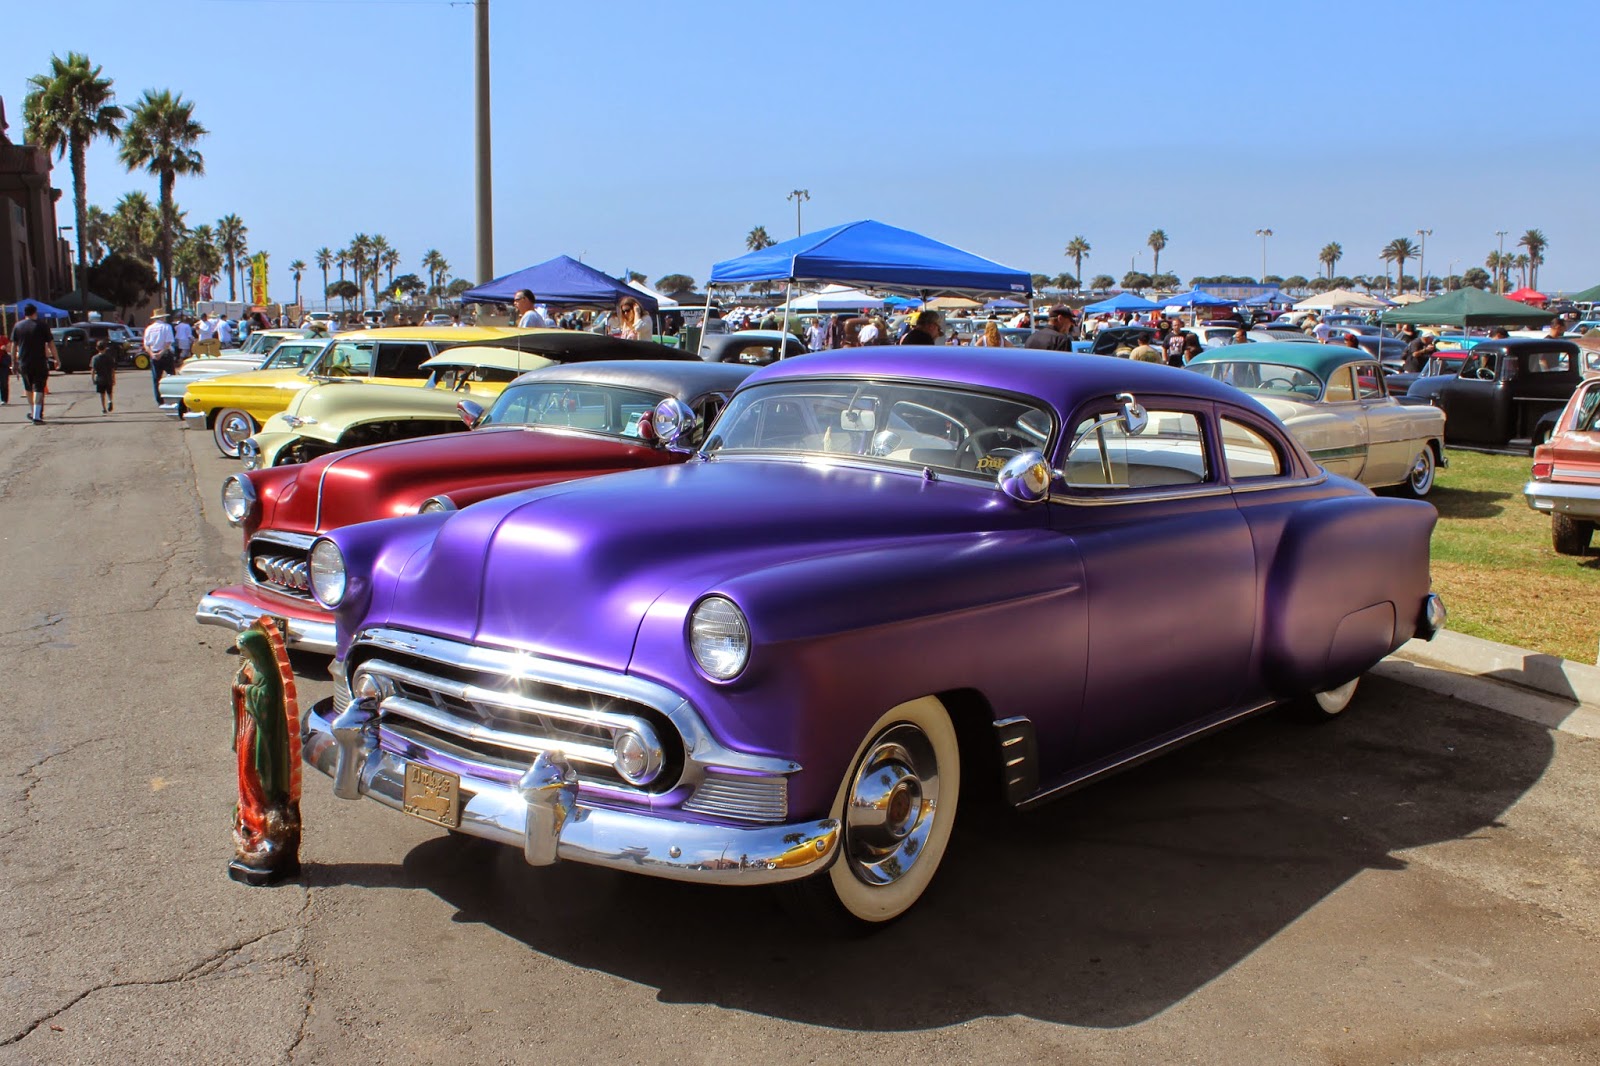 Covering Classic Cars 2014 Ventura Nationals Car Show Photos in Extraordinary classic cars ventura you should have